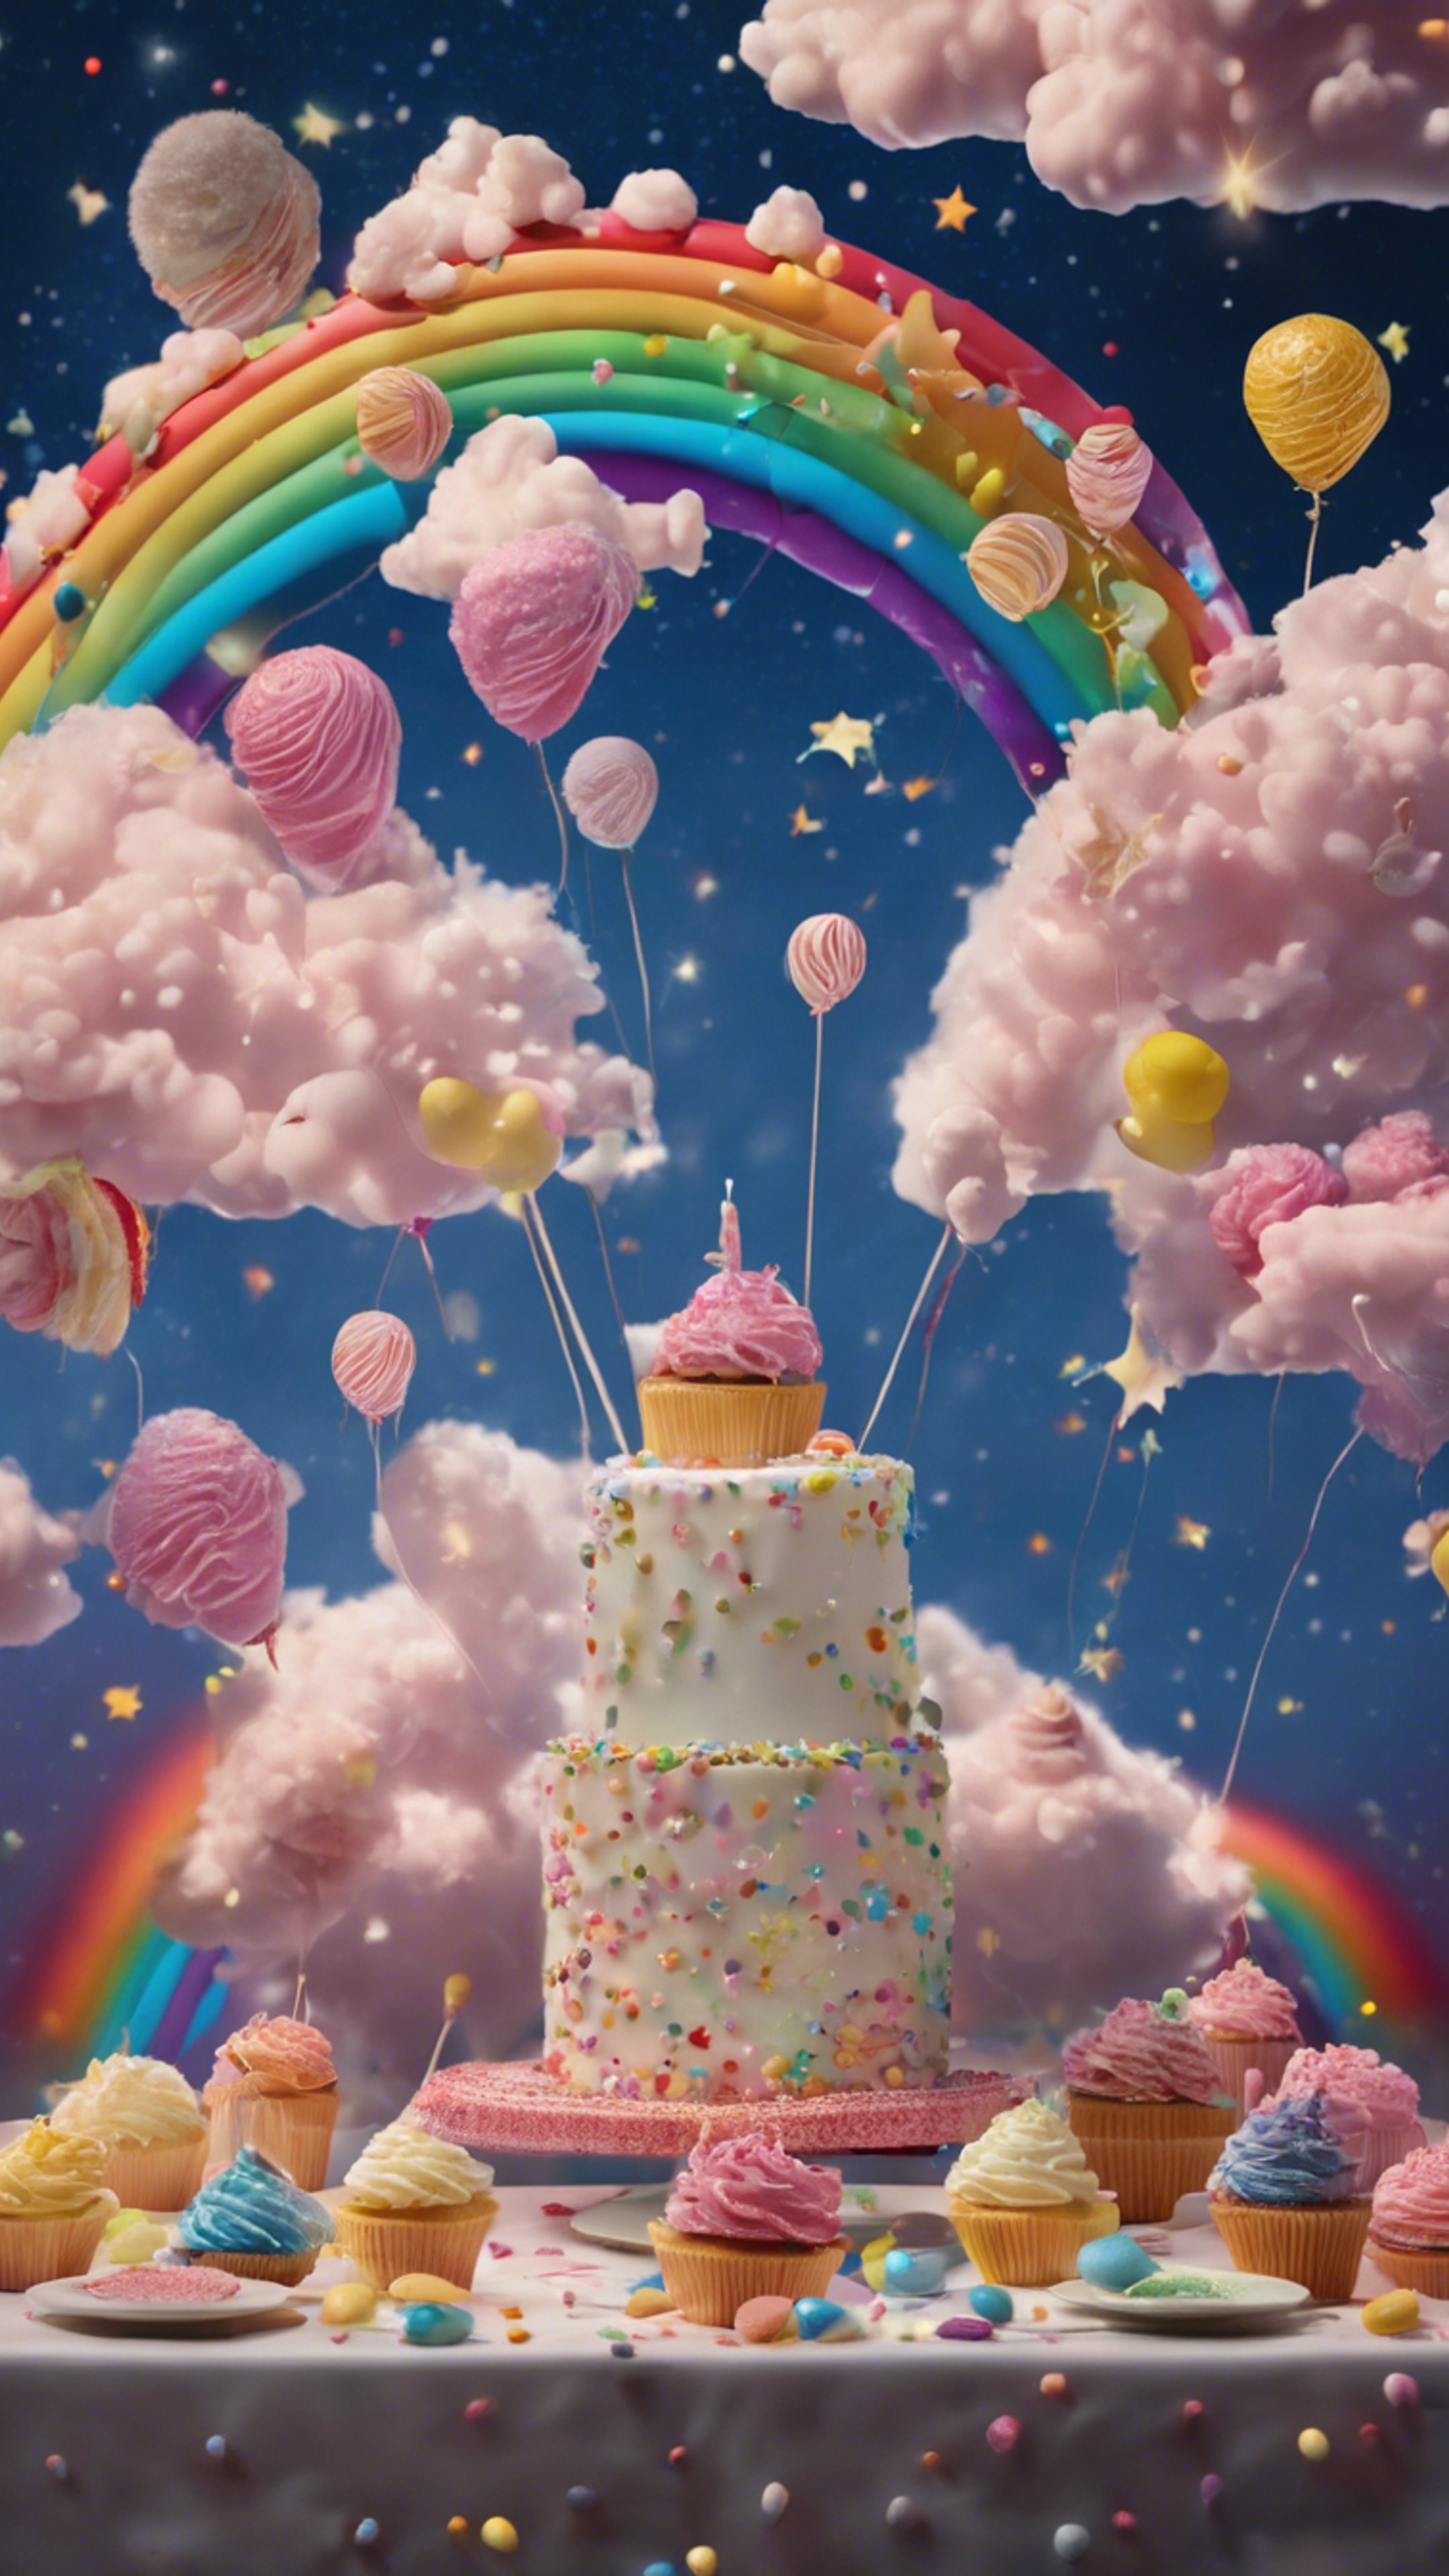 Surreal representation of a birthday party with floating cakes, candies amid fluffy clouds and rainbows discordantly juxtaposed against a starry night sky.壁紙[7f18c2fd7760424e83fc]